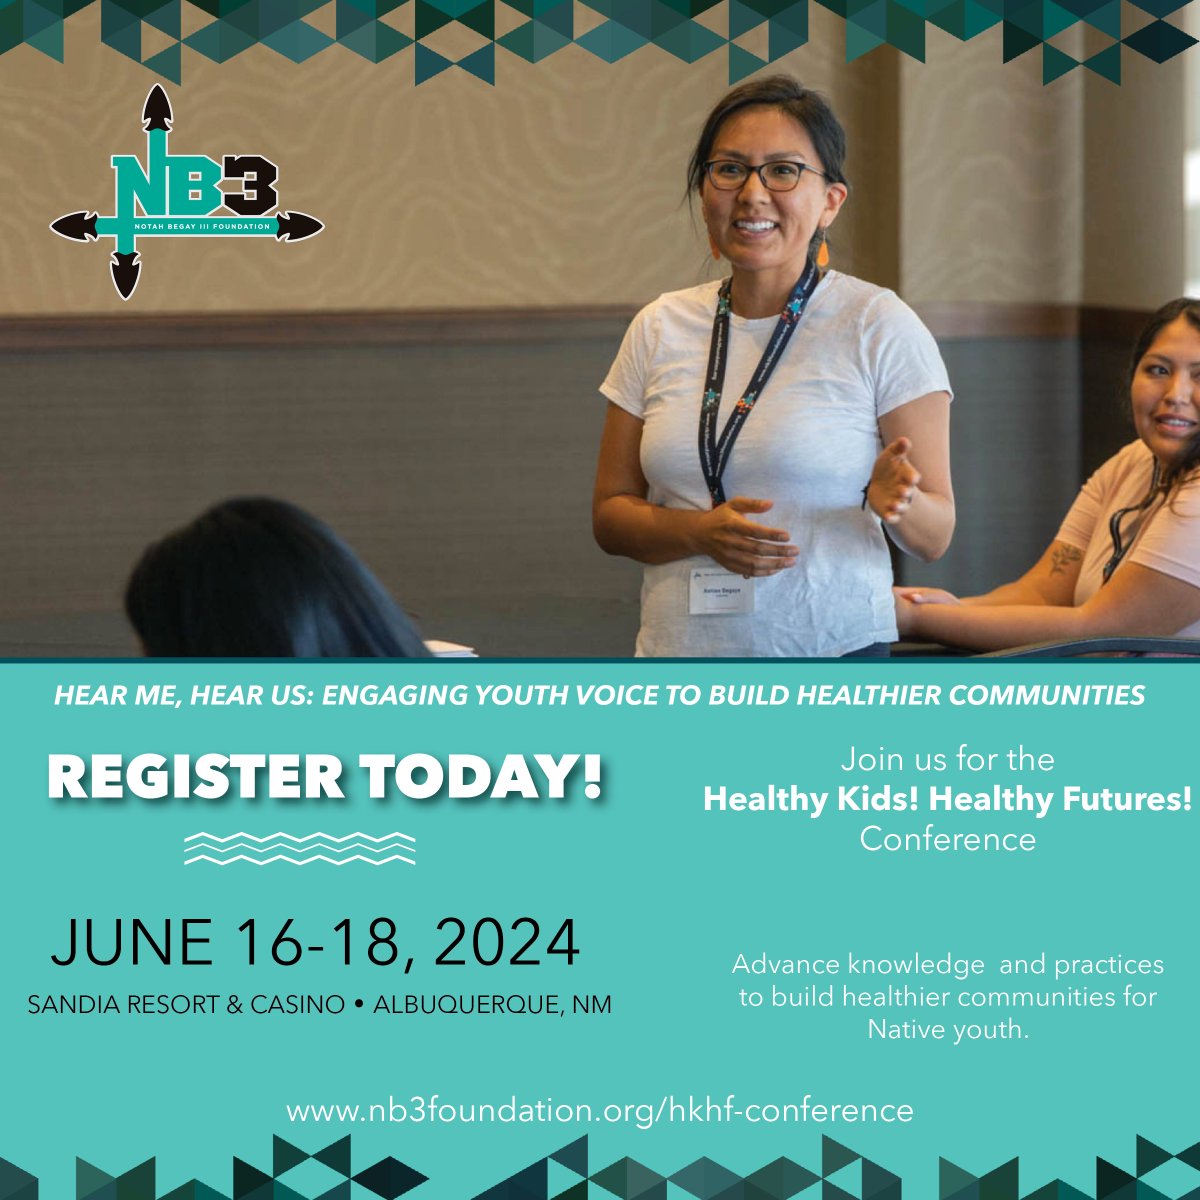 Join us for the #NB3F 2024 Healthy Kids! Healthy Futures! Conference June 16-18 at Sandia Resort & Casino, Albuquerque, NM. This year’s conference theme is, “Hear Me, Hear Us: Engaging Youth Voice to Build Healthier Communities”. Register ➡️ nb3foundation.org/hkhf-conferenc… #NB3F